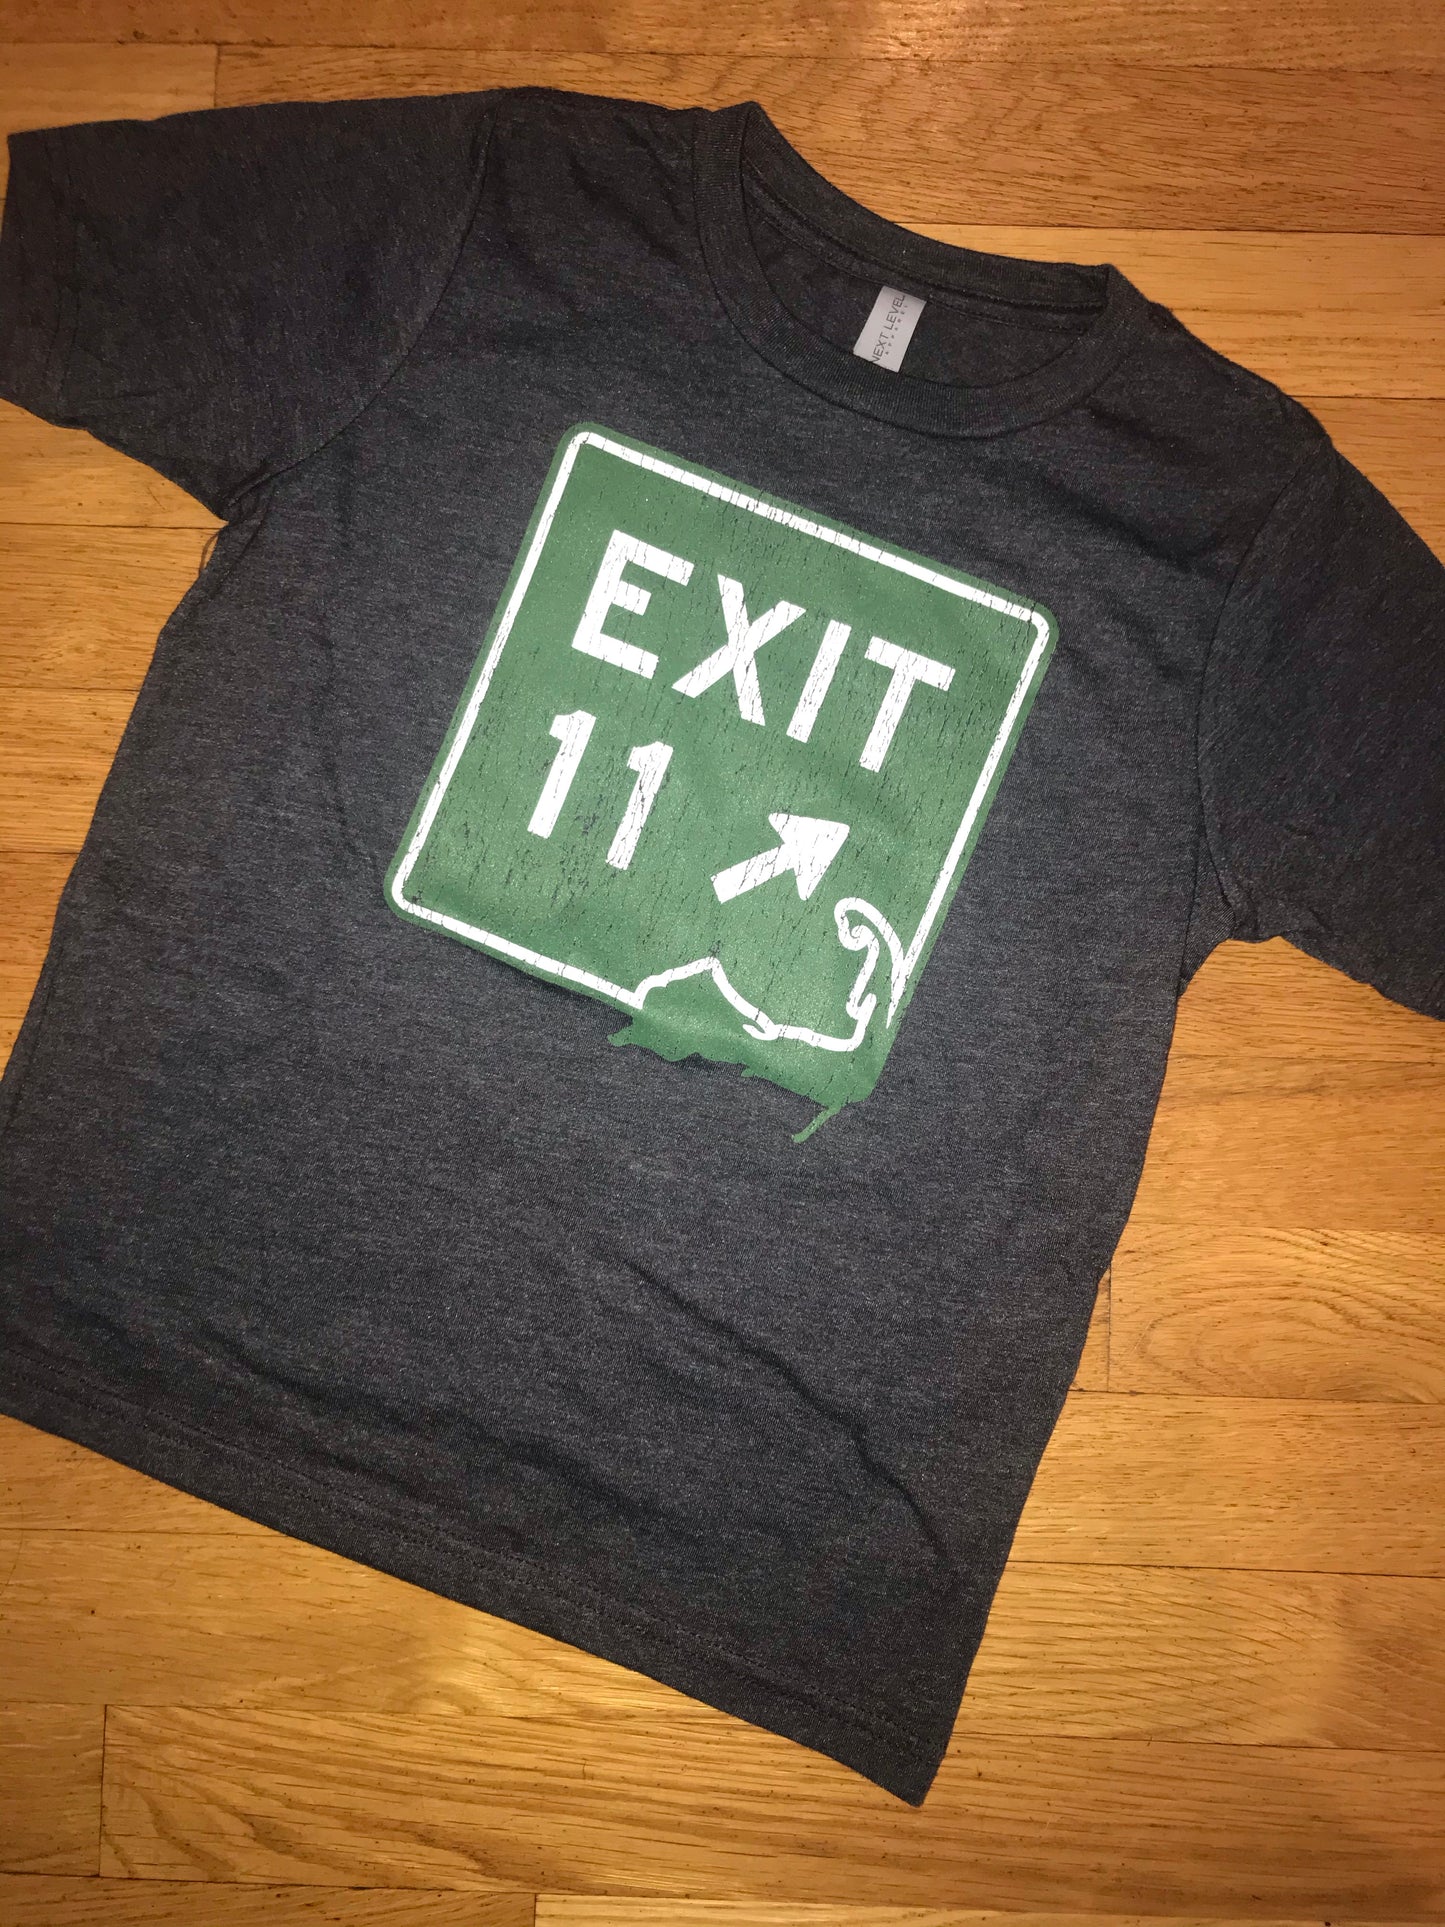 Youth Exit 9A Tee - Price Drop!